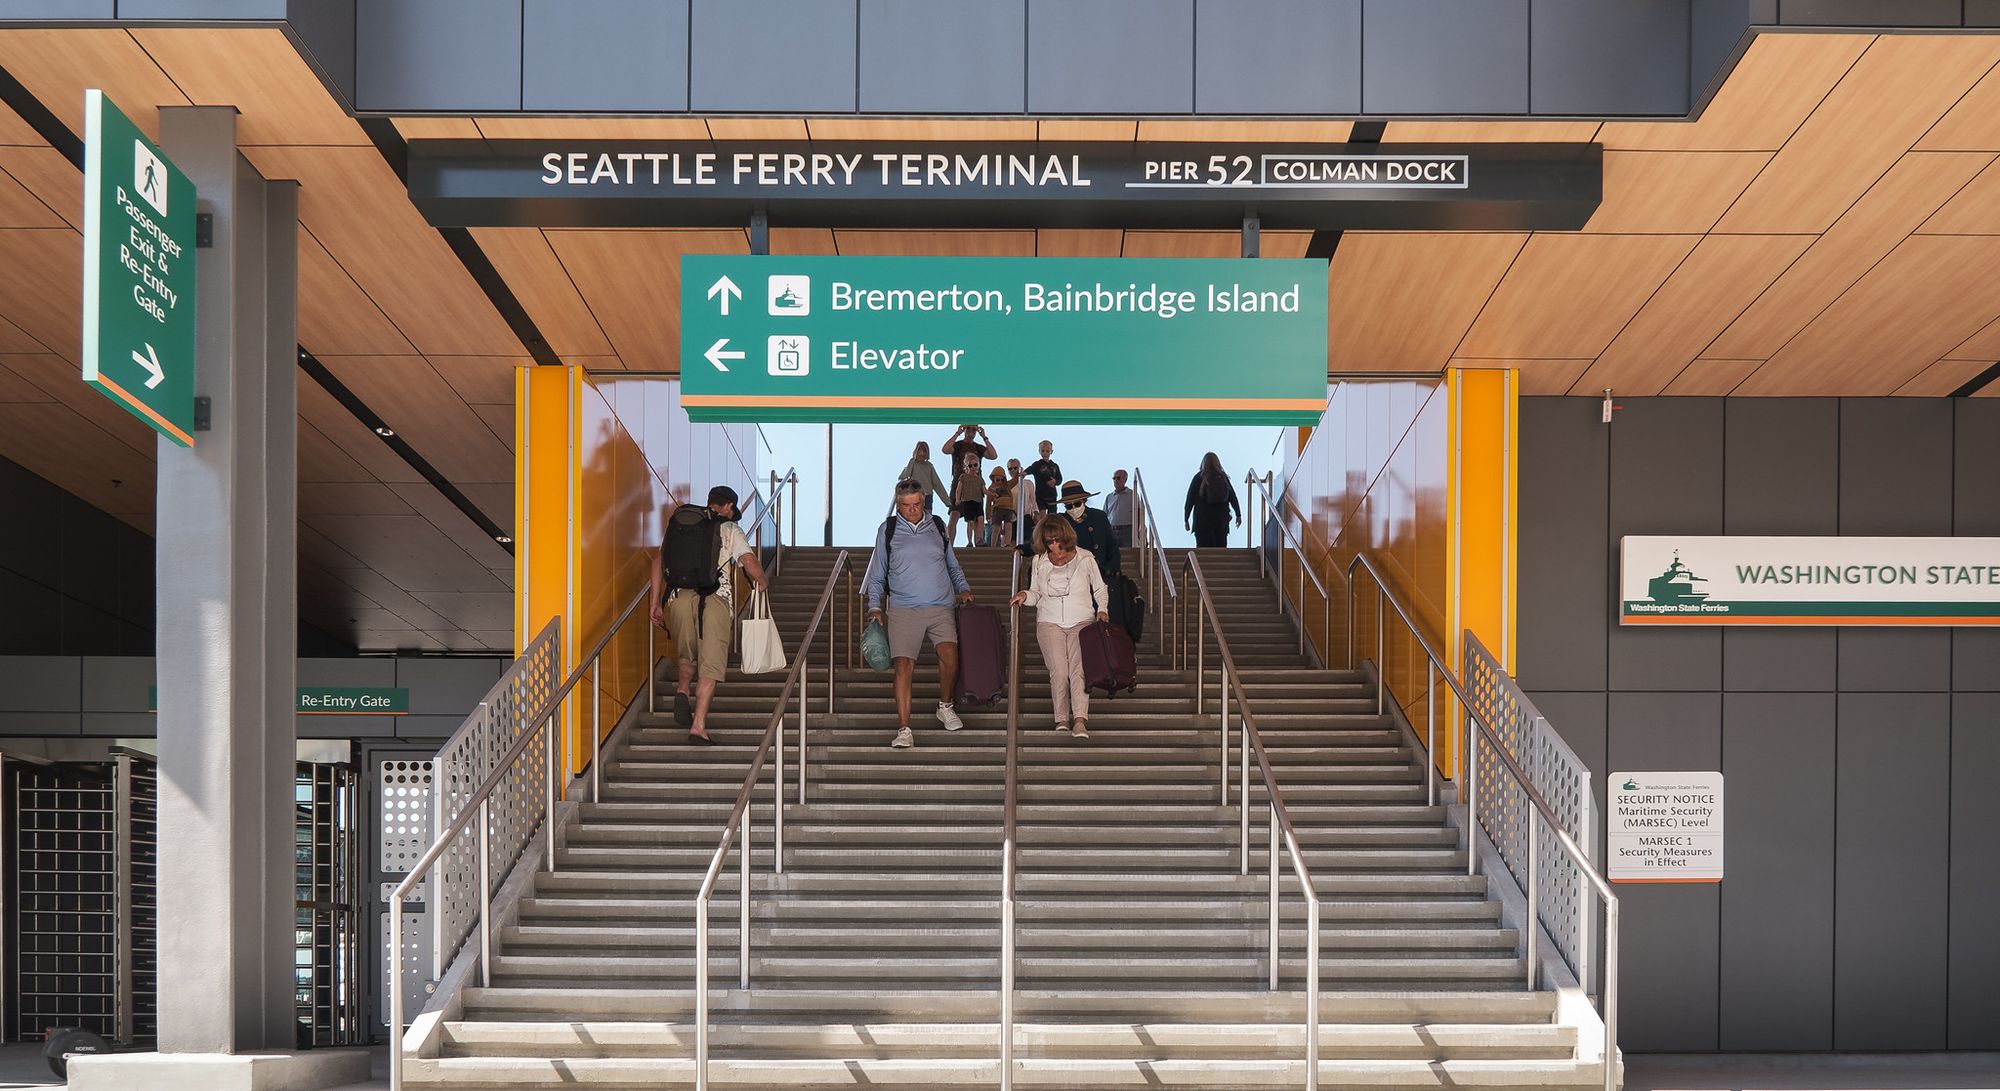 Passengers walk down a flight of stairs in a newly constructed building with ferry signs.